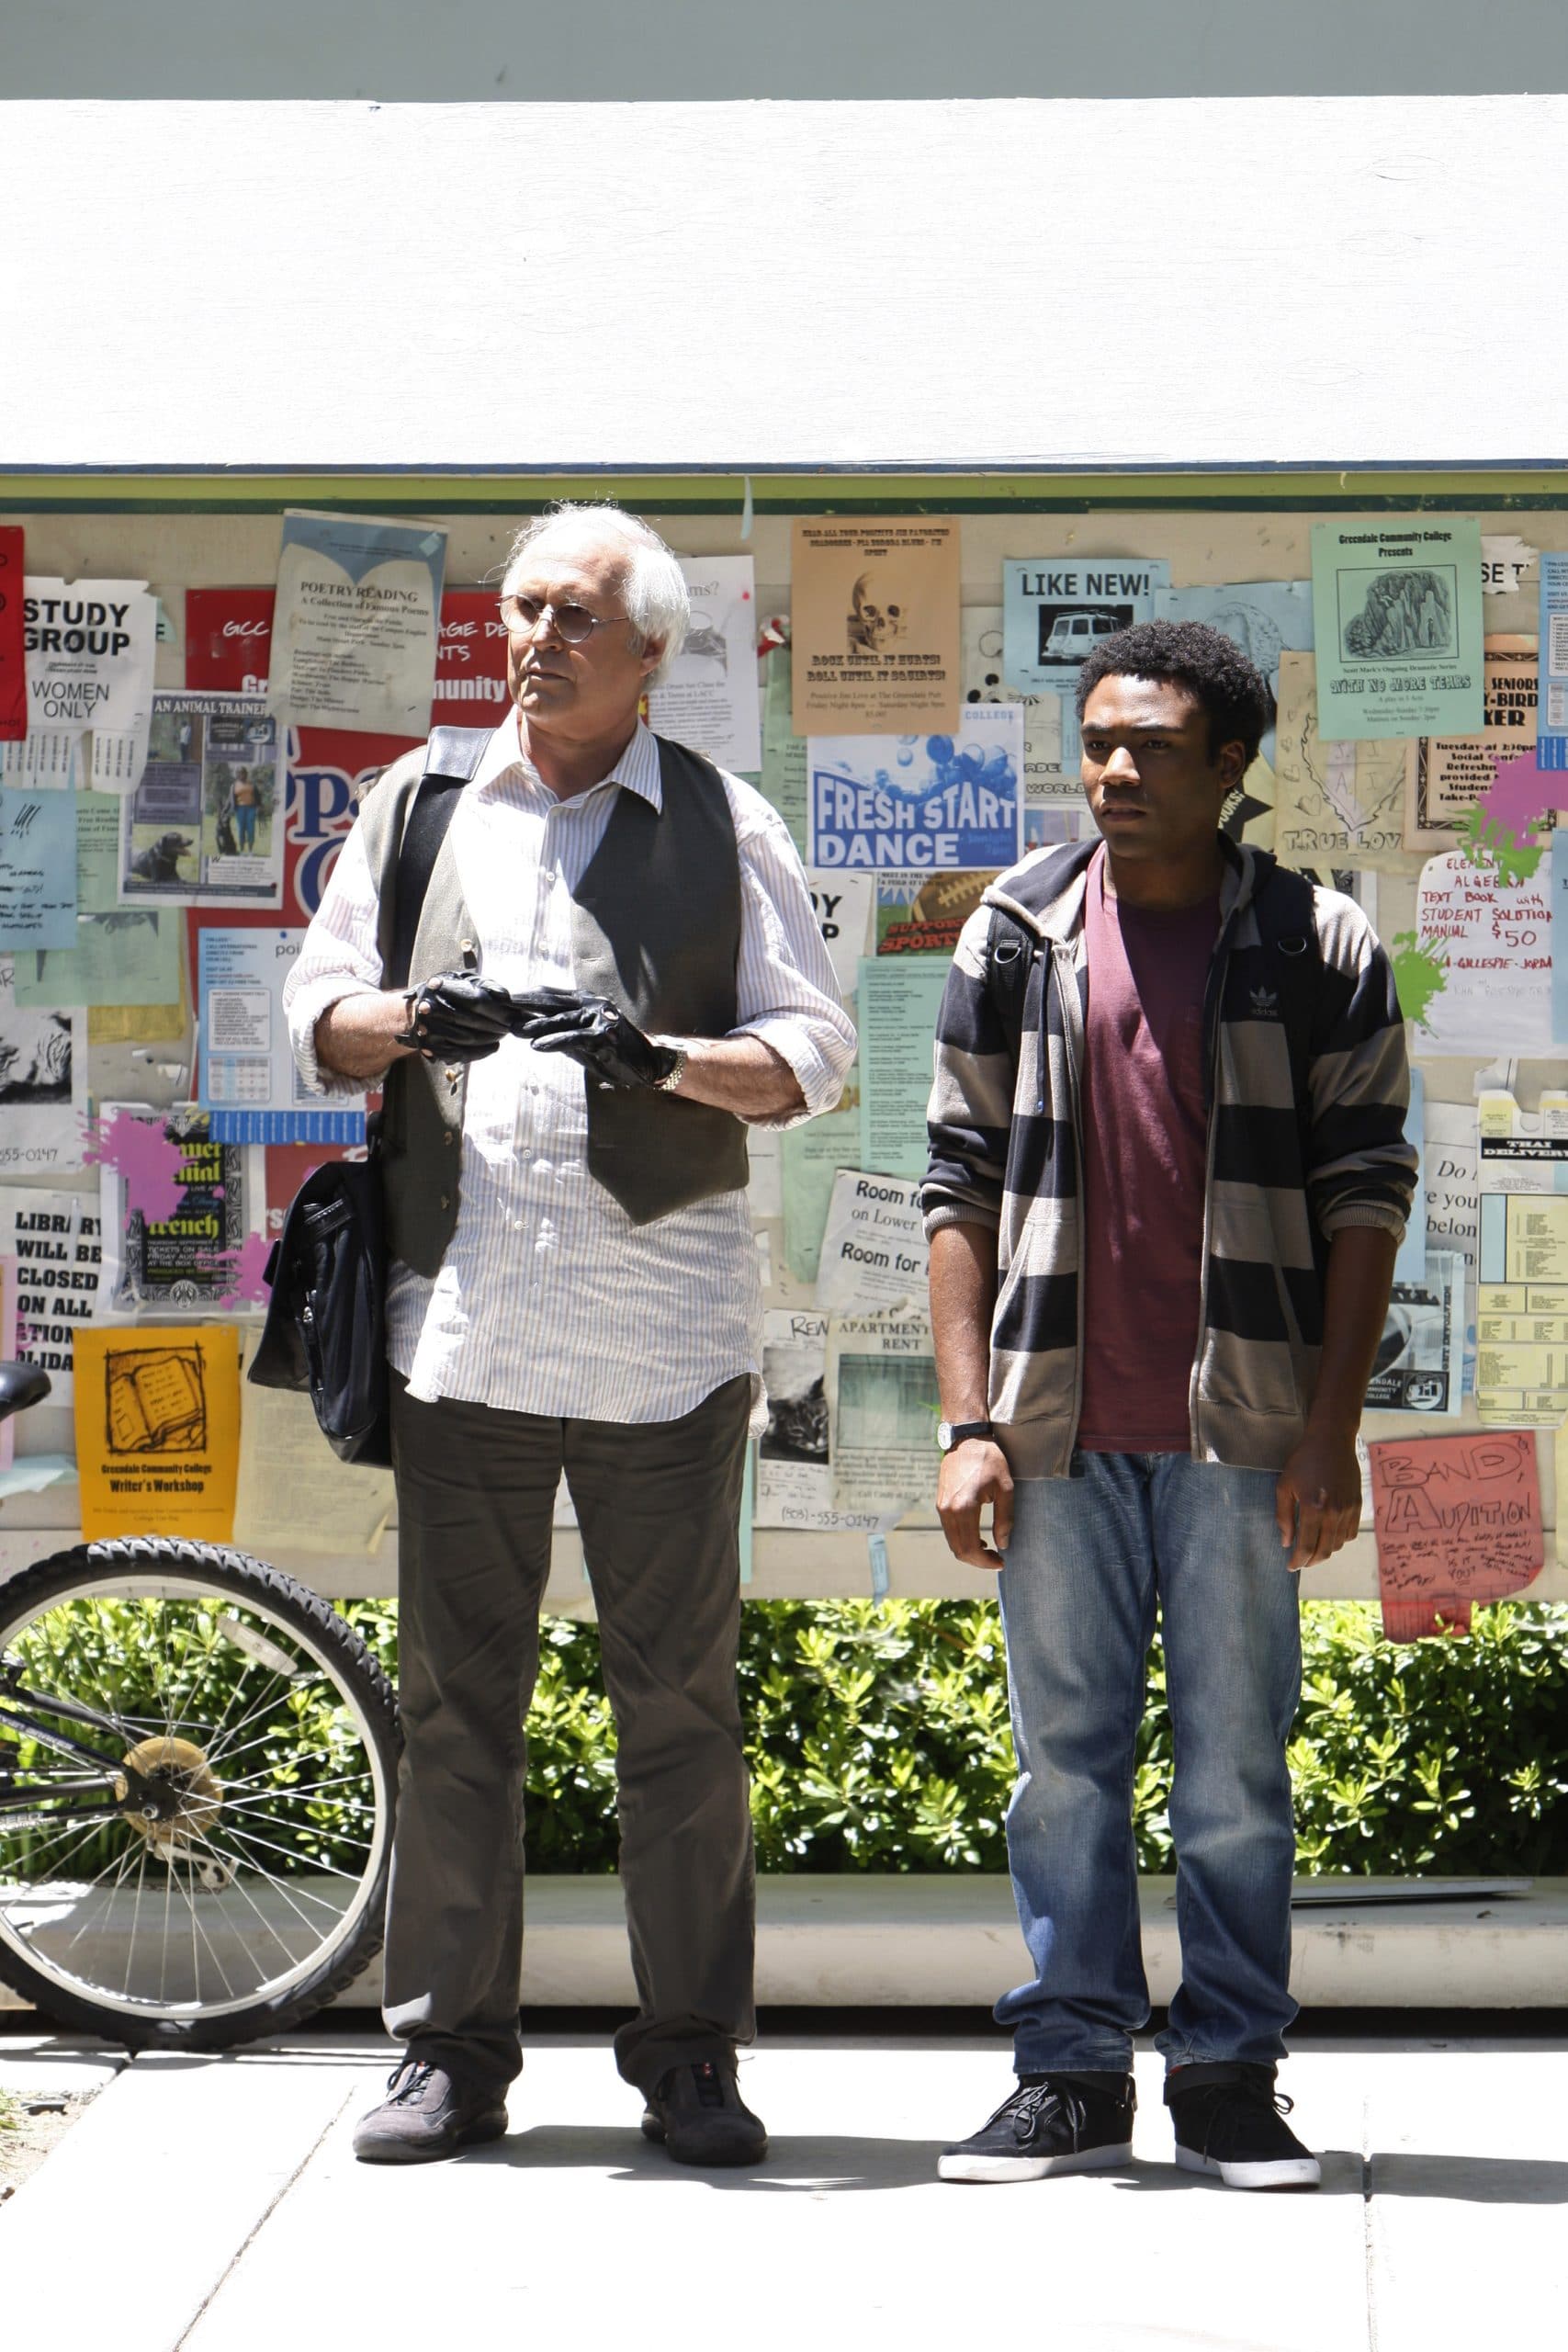 COMMUNITY, (from left): Chevy Chase, Donald Glover, 'Anthropology 101'